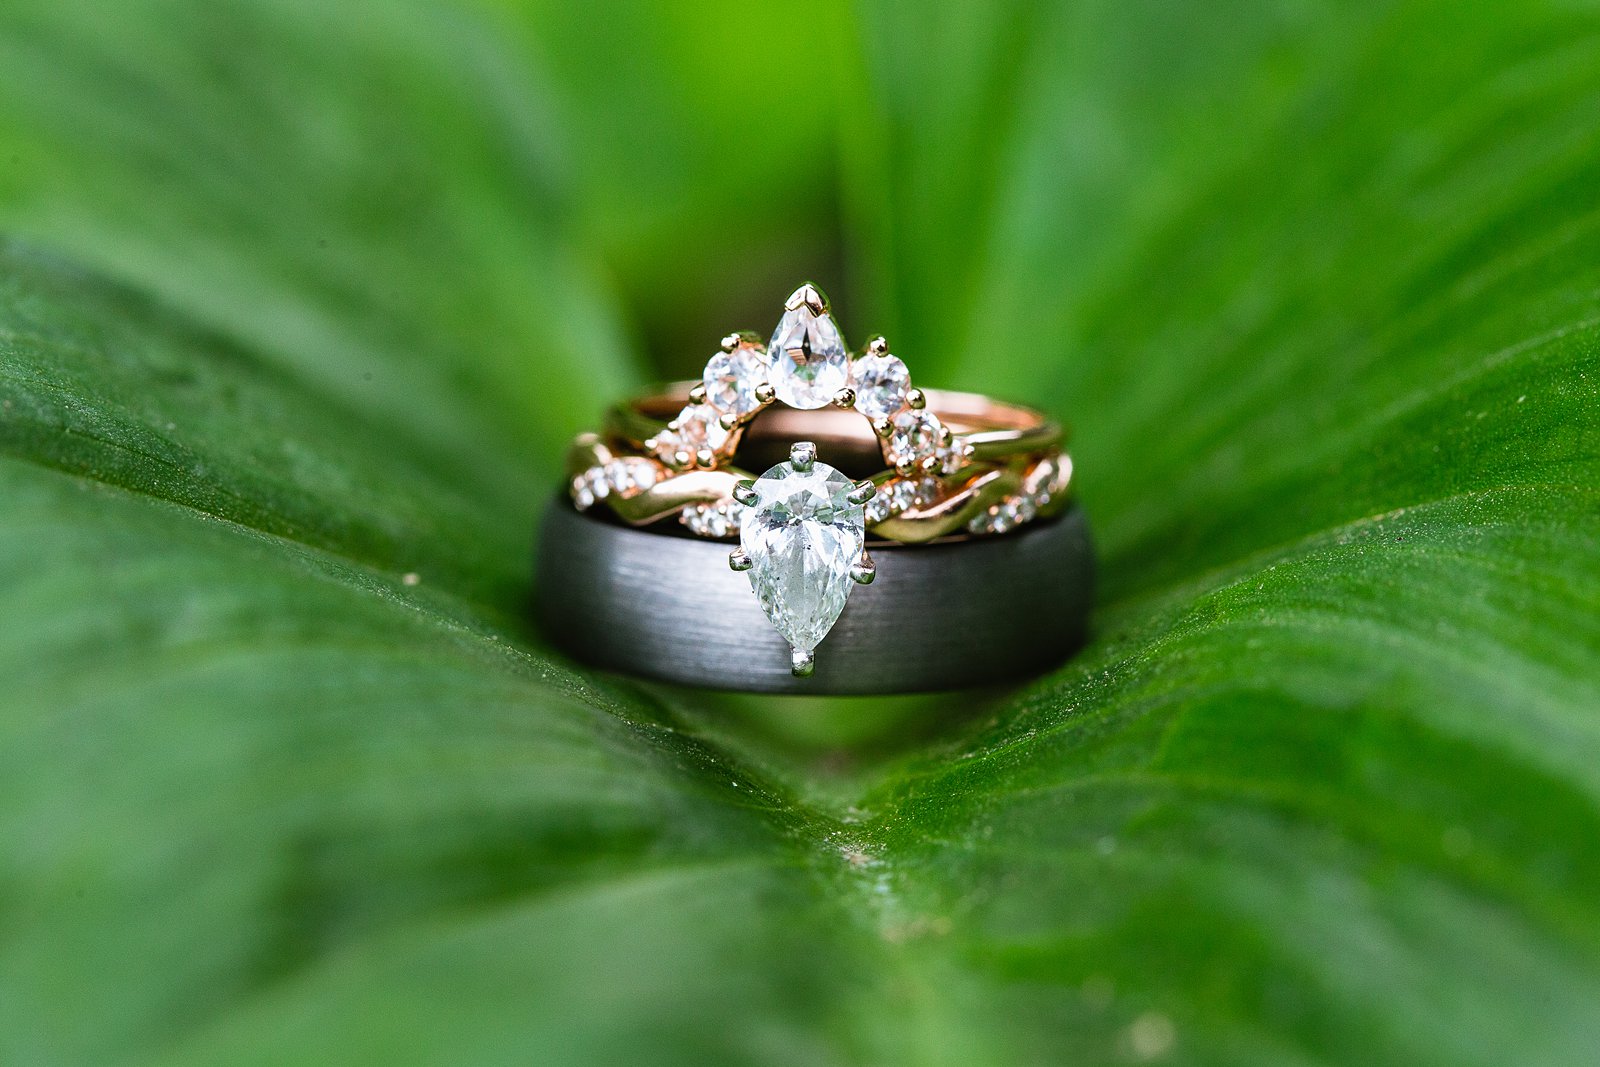 Bride and groom's unique wedding rings on a leaf for their garden wedding by PMA Photography.